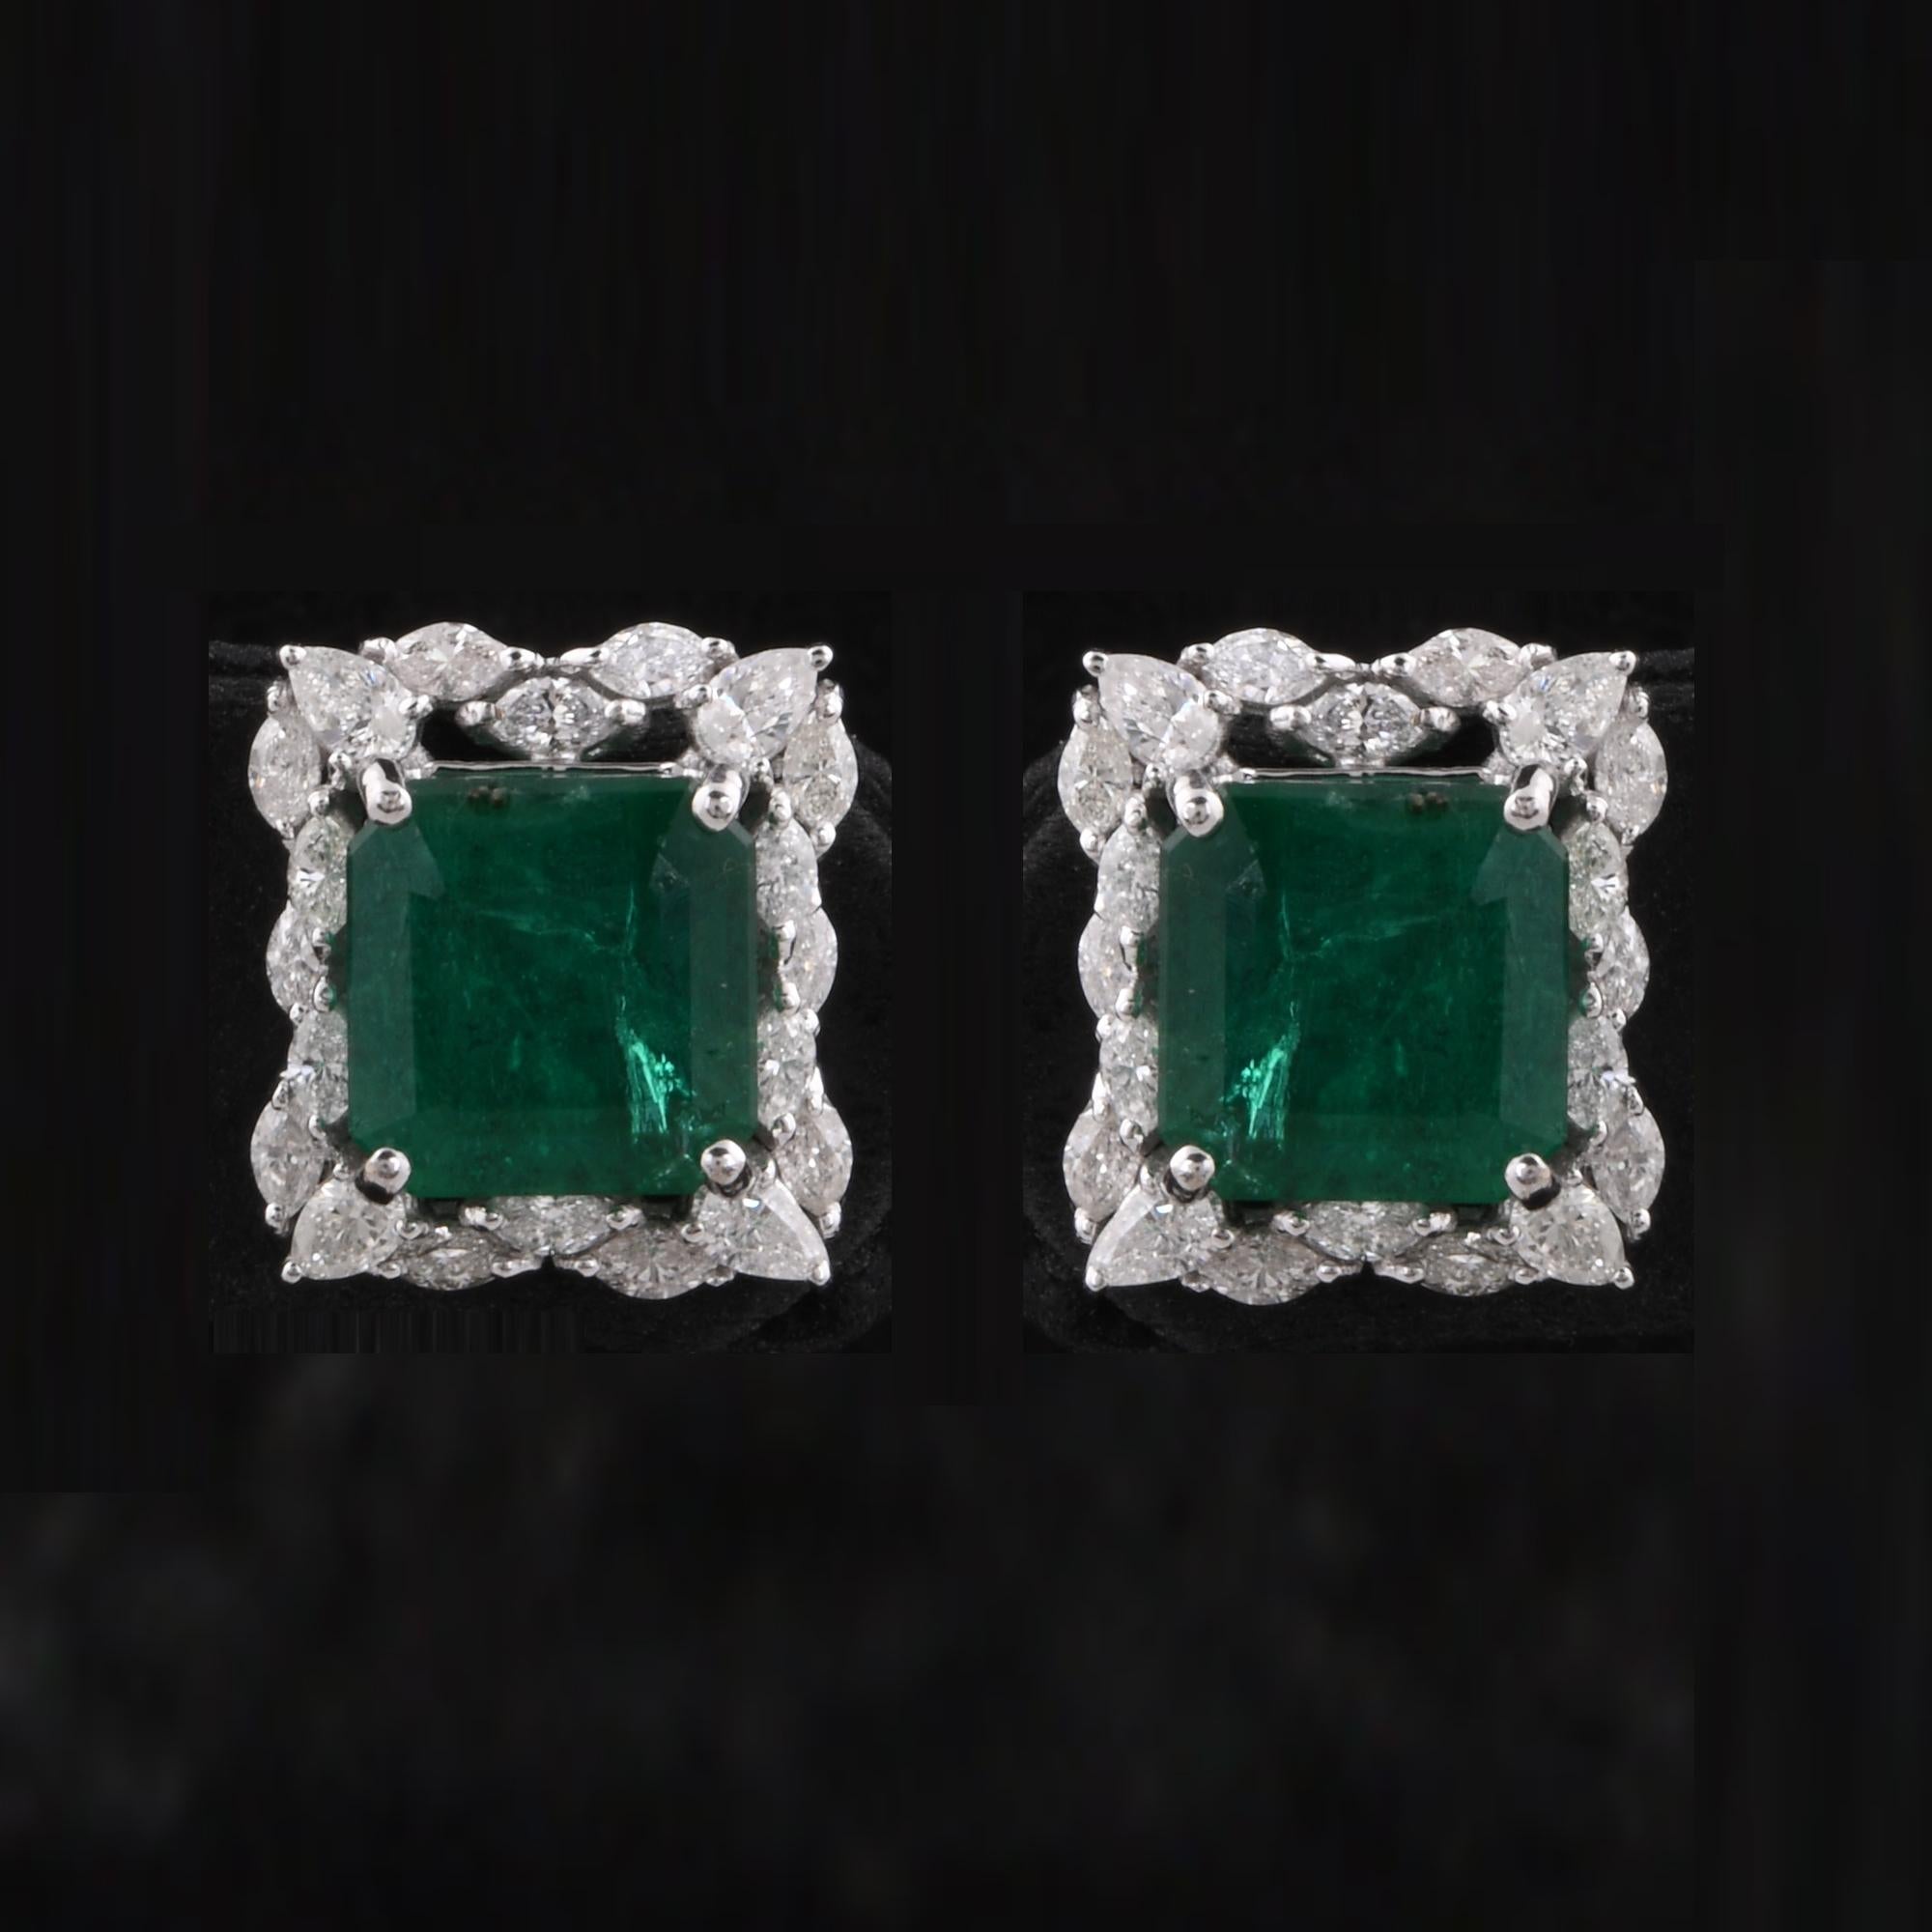 The design of the earrings is both classic and timeless, featuring a sleek and understated stud silhouette that complements any ensemble. Whether worn for a special occasion or as an everyday accessory, these Zambian Emerald Gemstone Stud Earrings